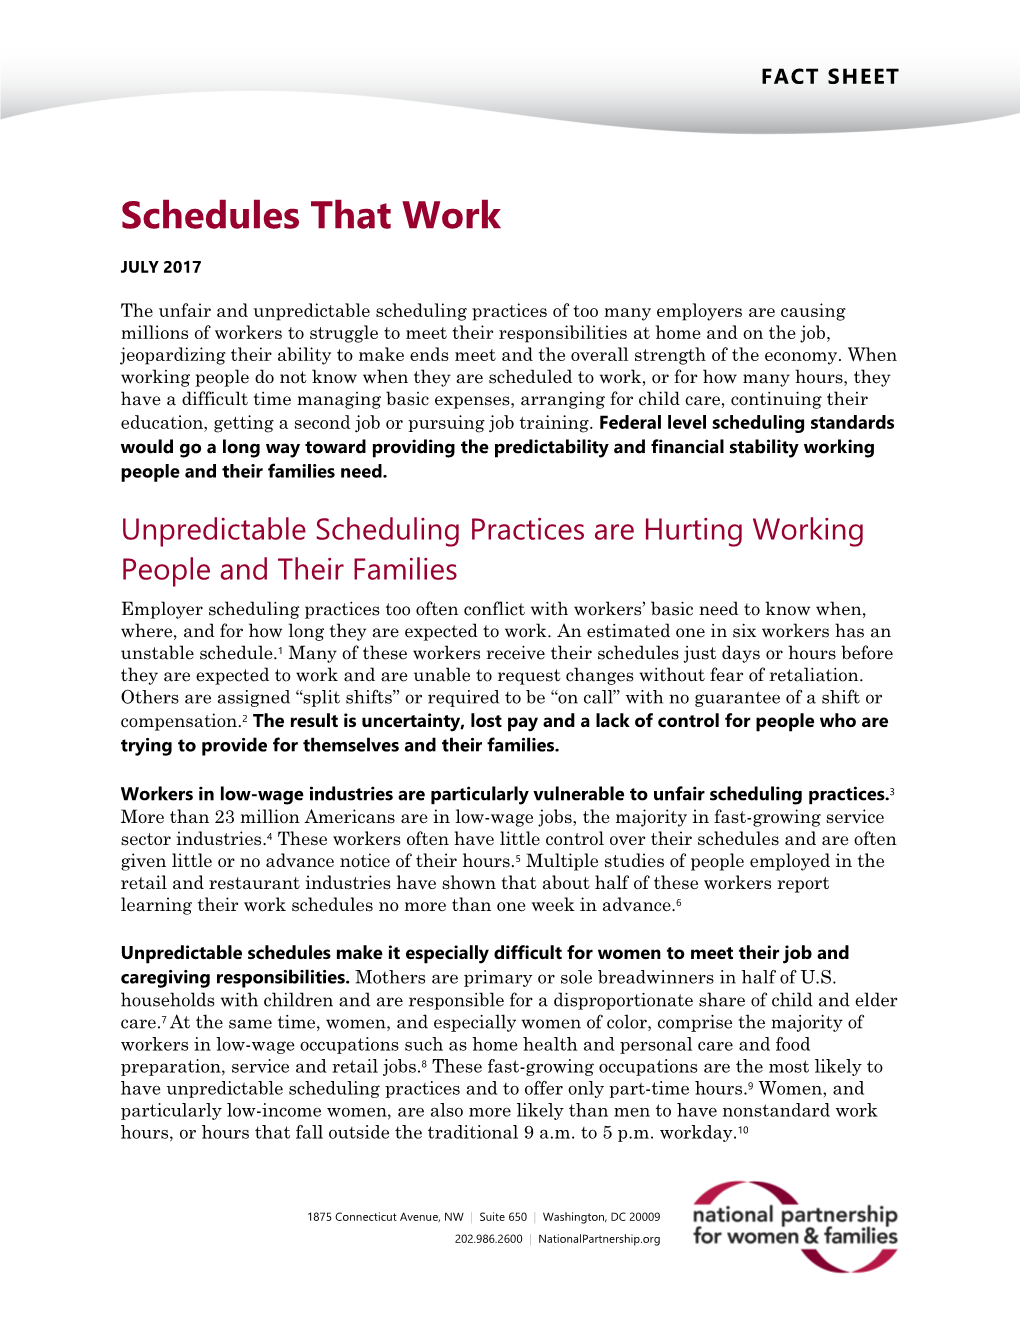 The Schedules That Work Act Would:  Give Workers More Control Over Their Schedules